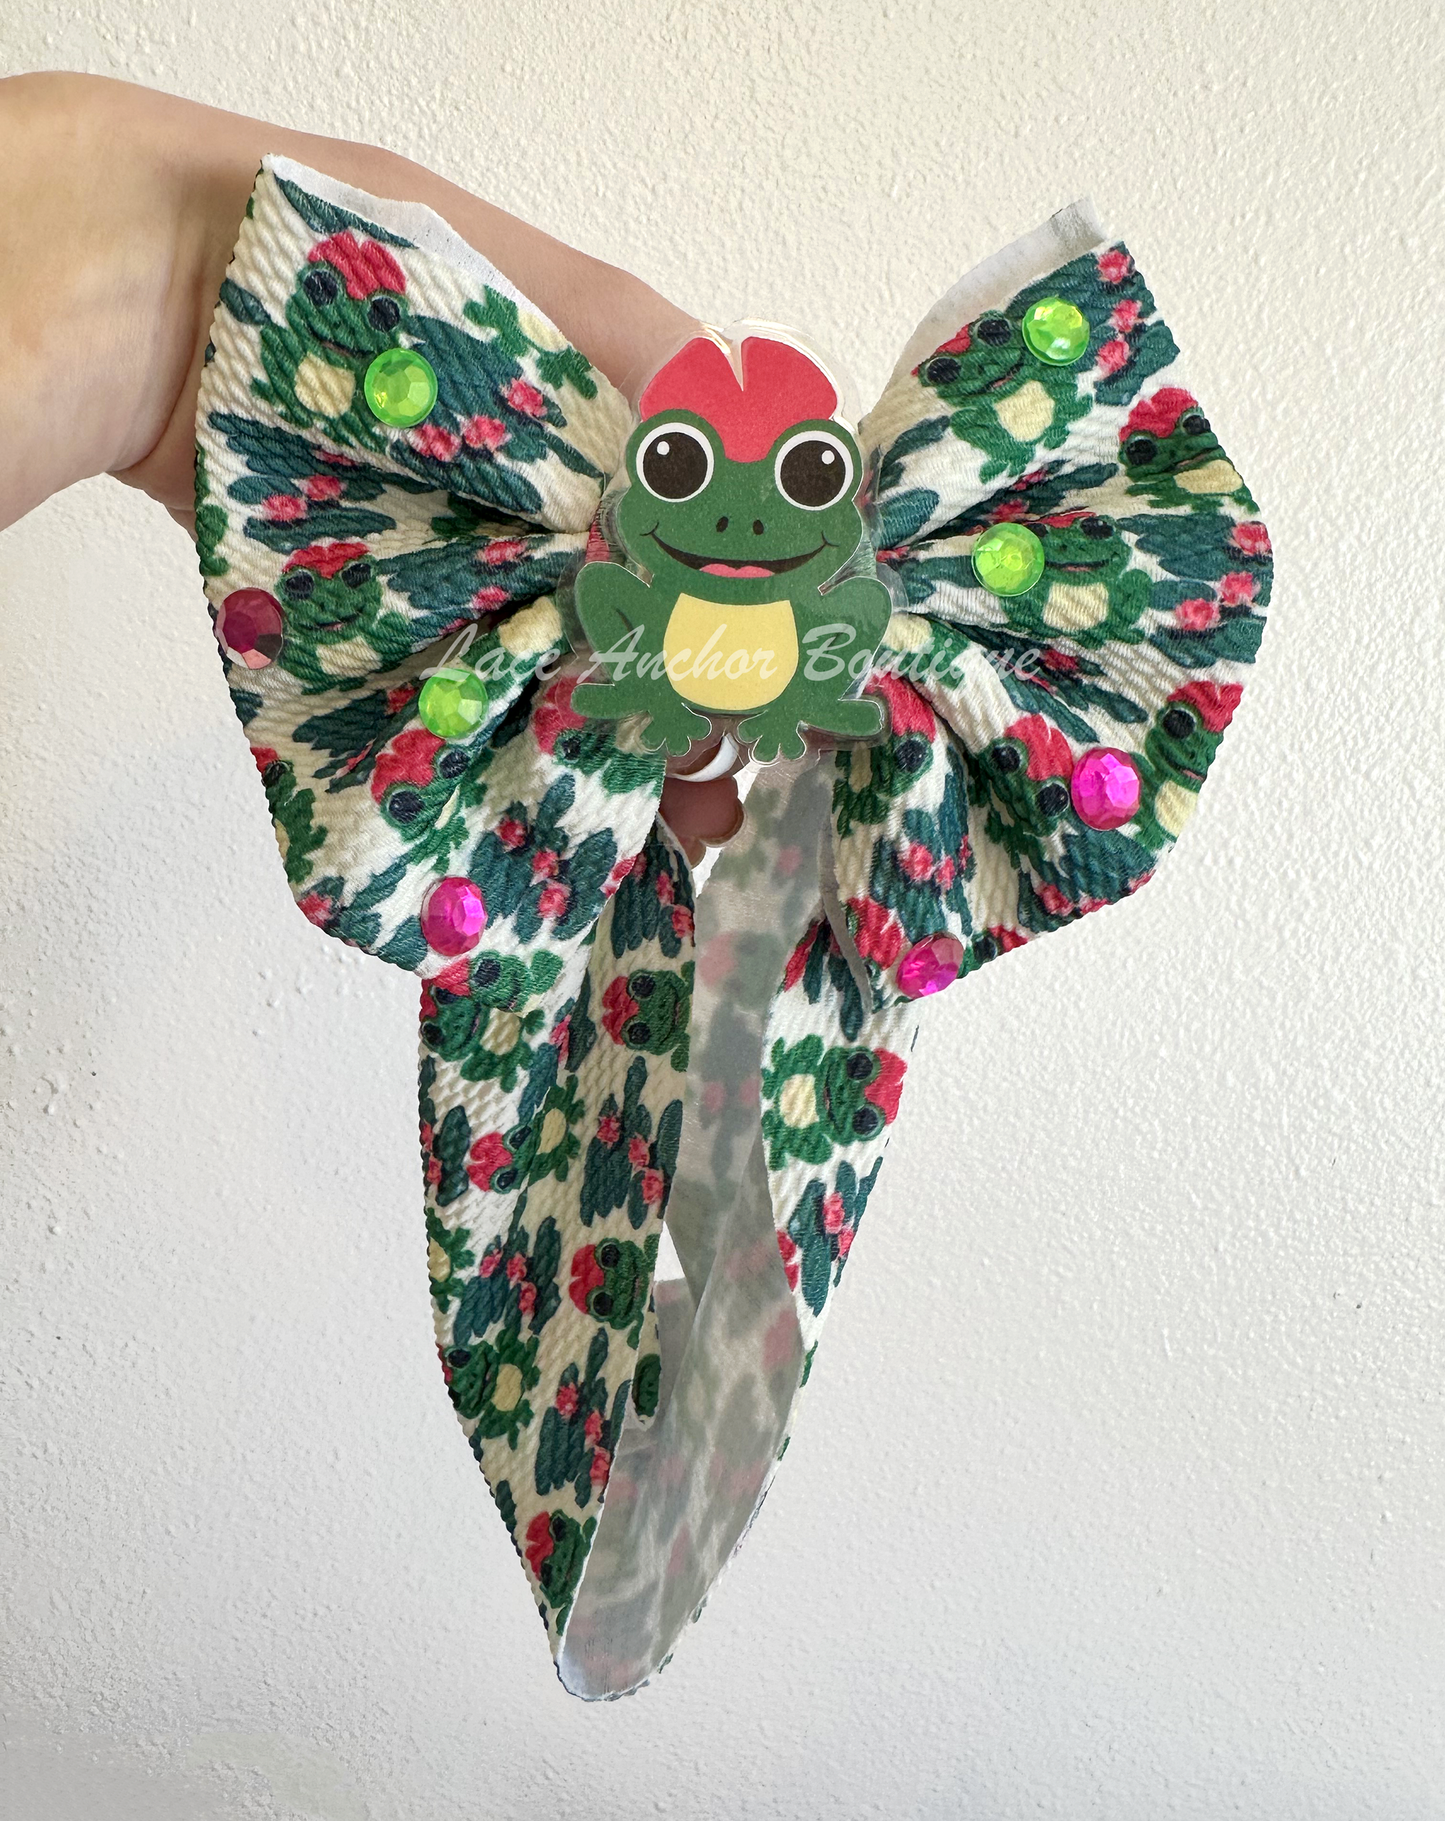 Frog Print Bling girls Hair Bow wrap with hot pink and green rhinestones and with girly bow wearing toad frog center